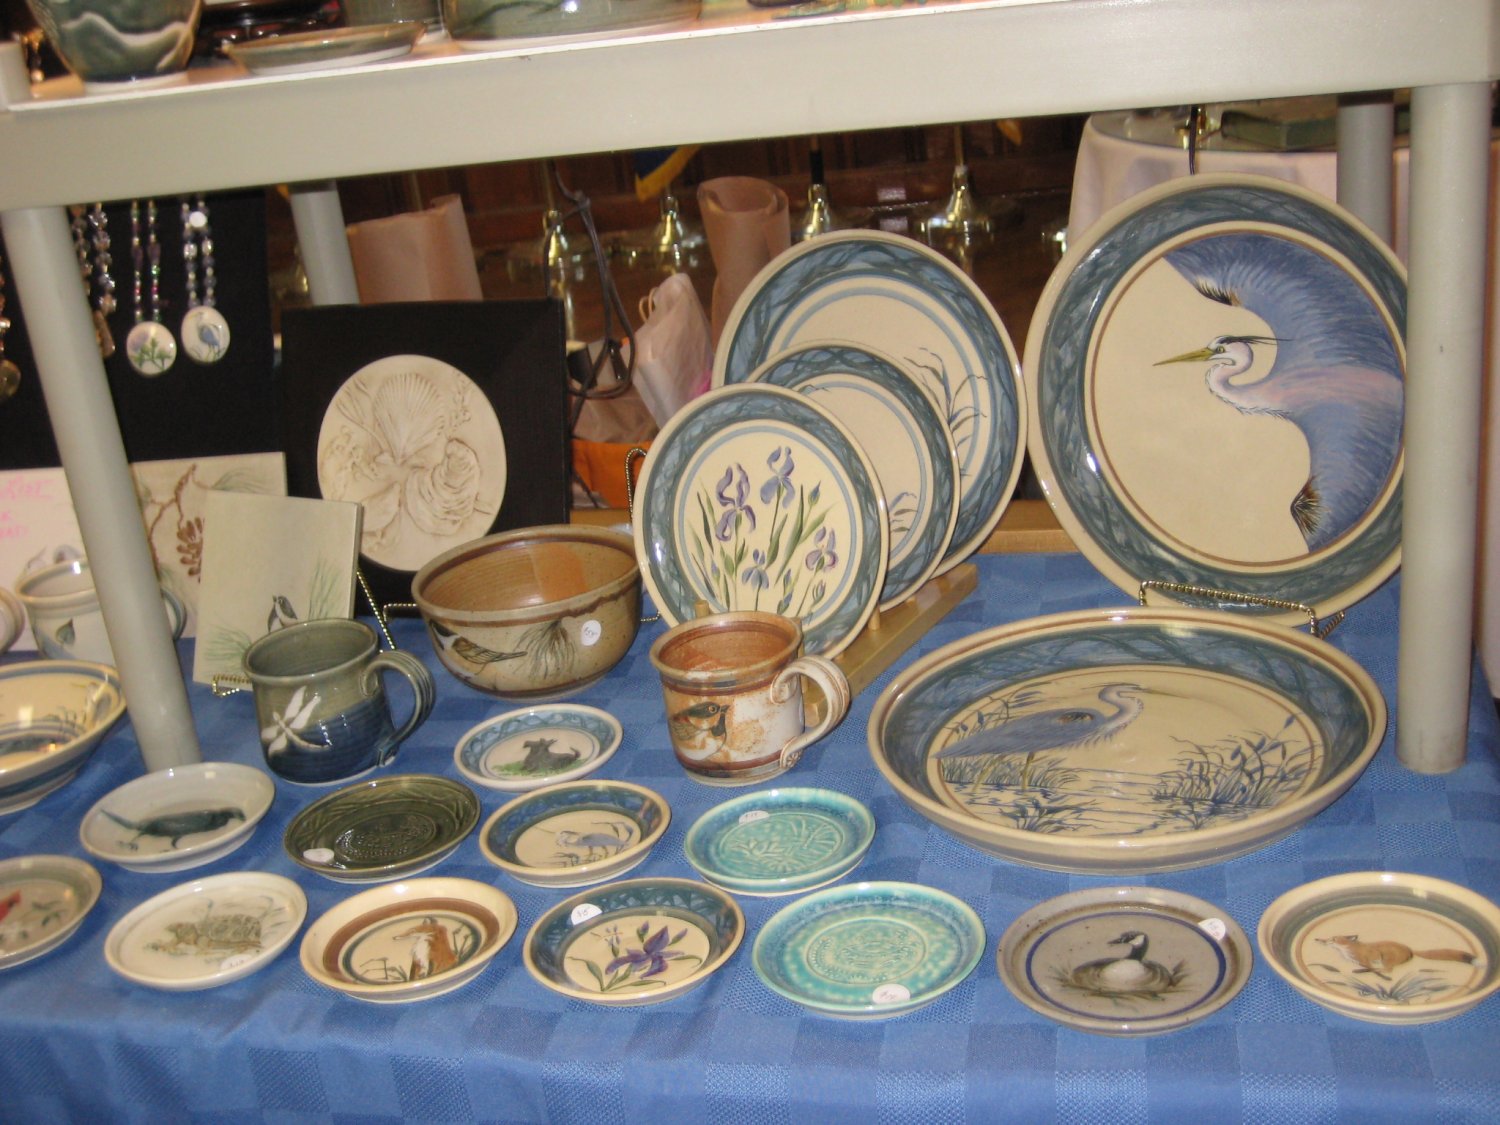  Some of Jean Higgins' handcrafted glazed stoneware.  